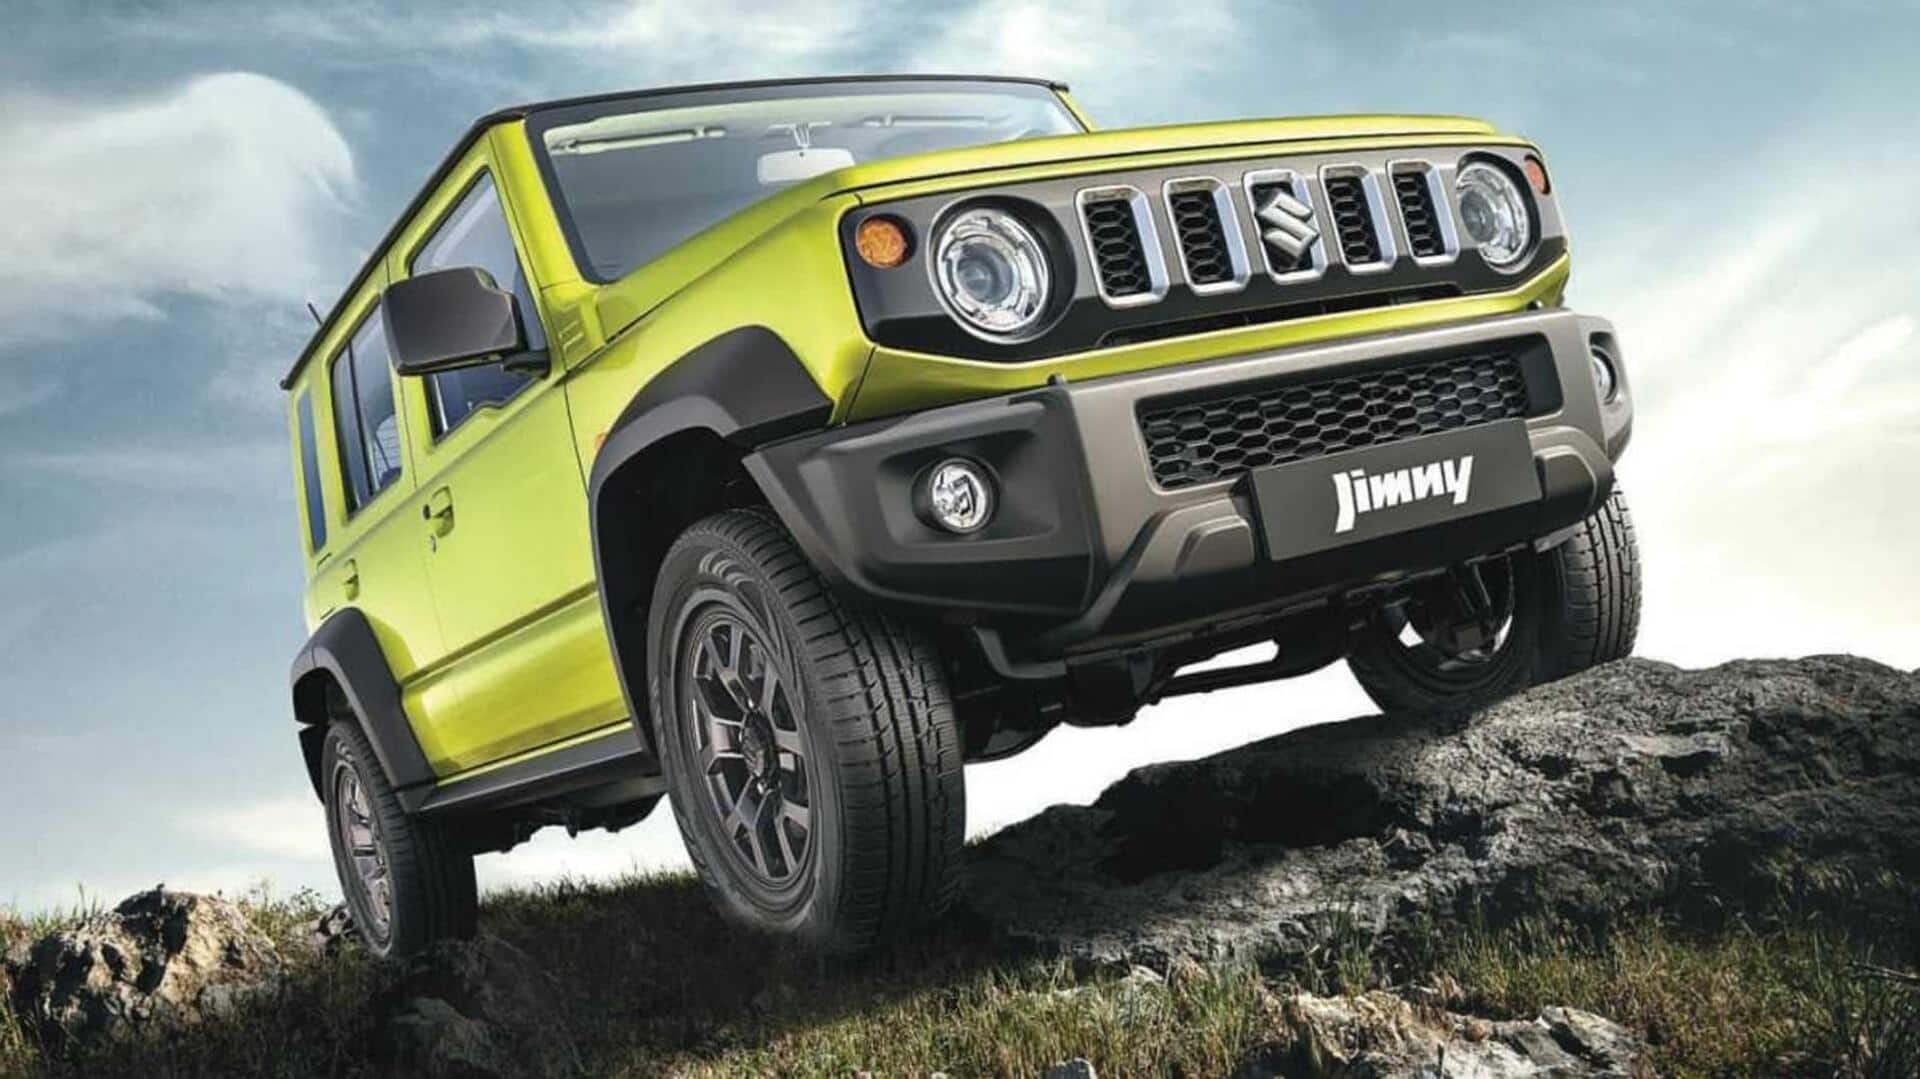 Maruti Suzuki Jimny revealed in South Africa: Check what's different